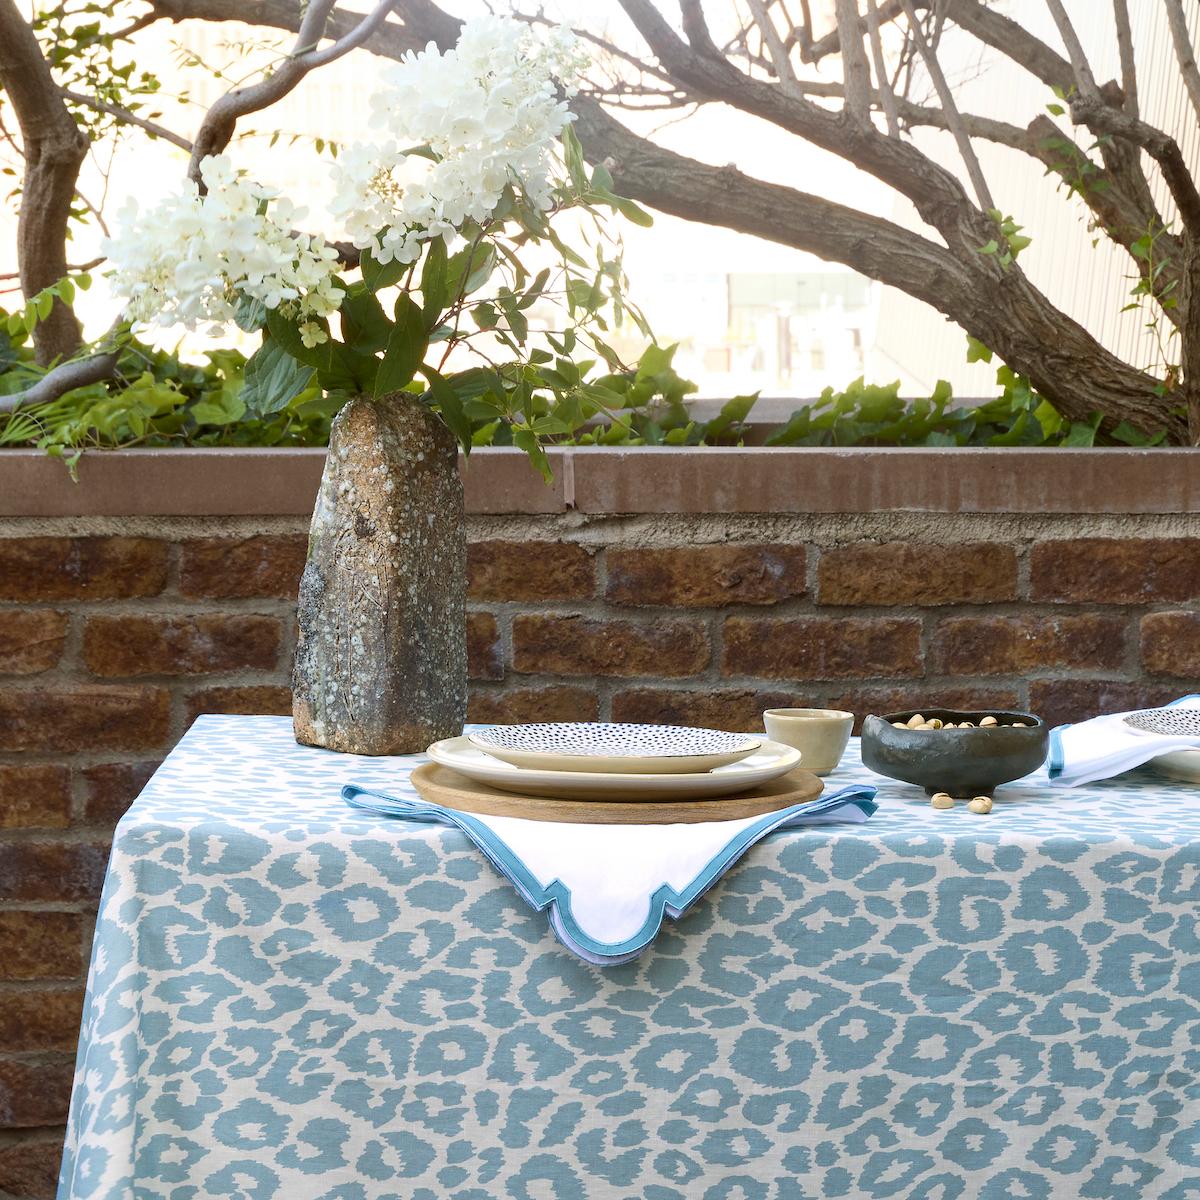 Iconic Leopard Placemat, Set of 4_SKY